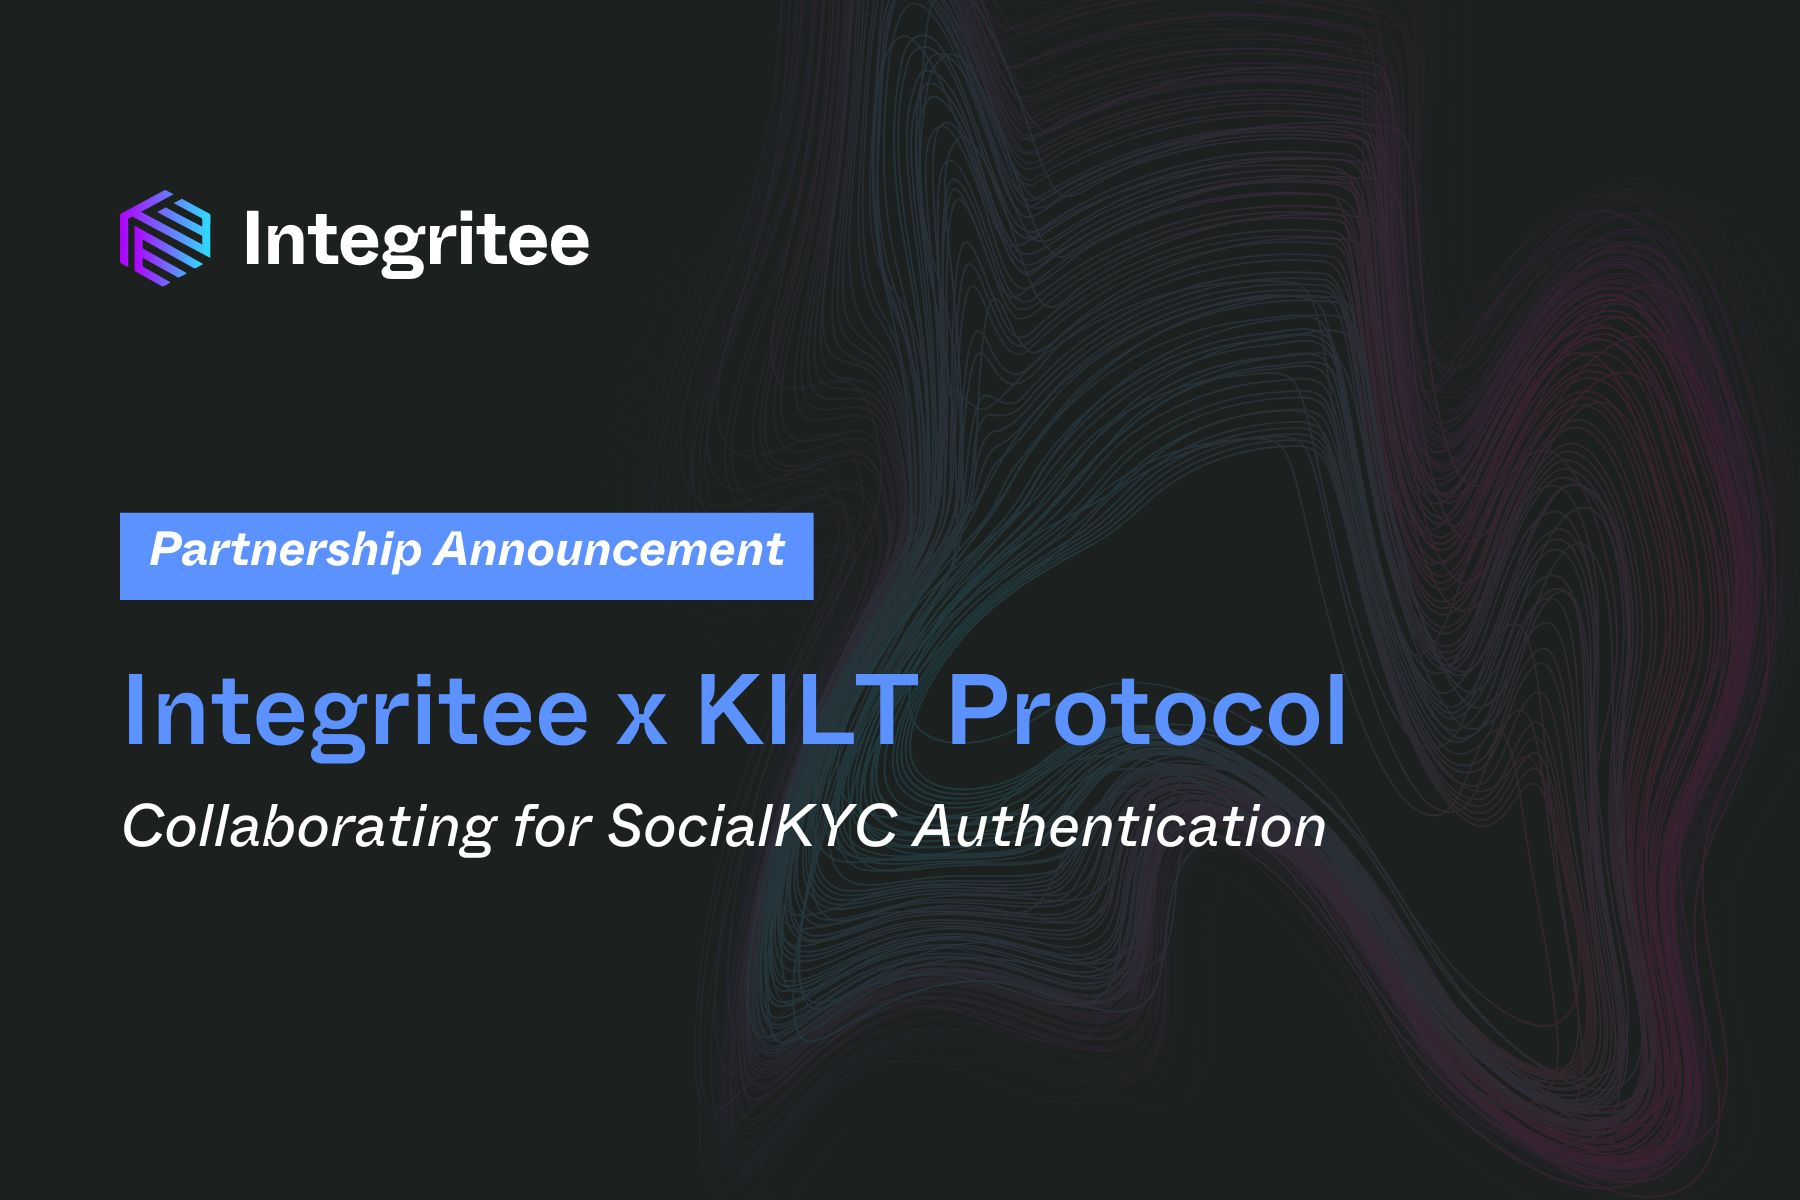 Integritee to Collaborate with KILT Protocol for SocialKYC Authentication